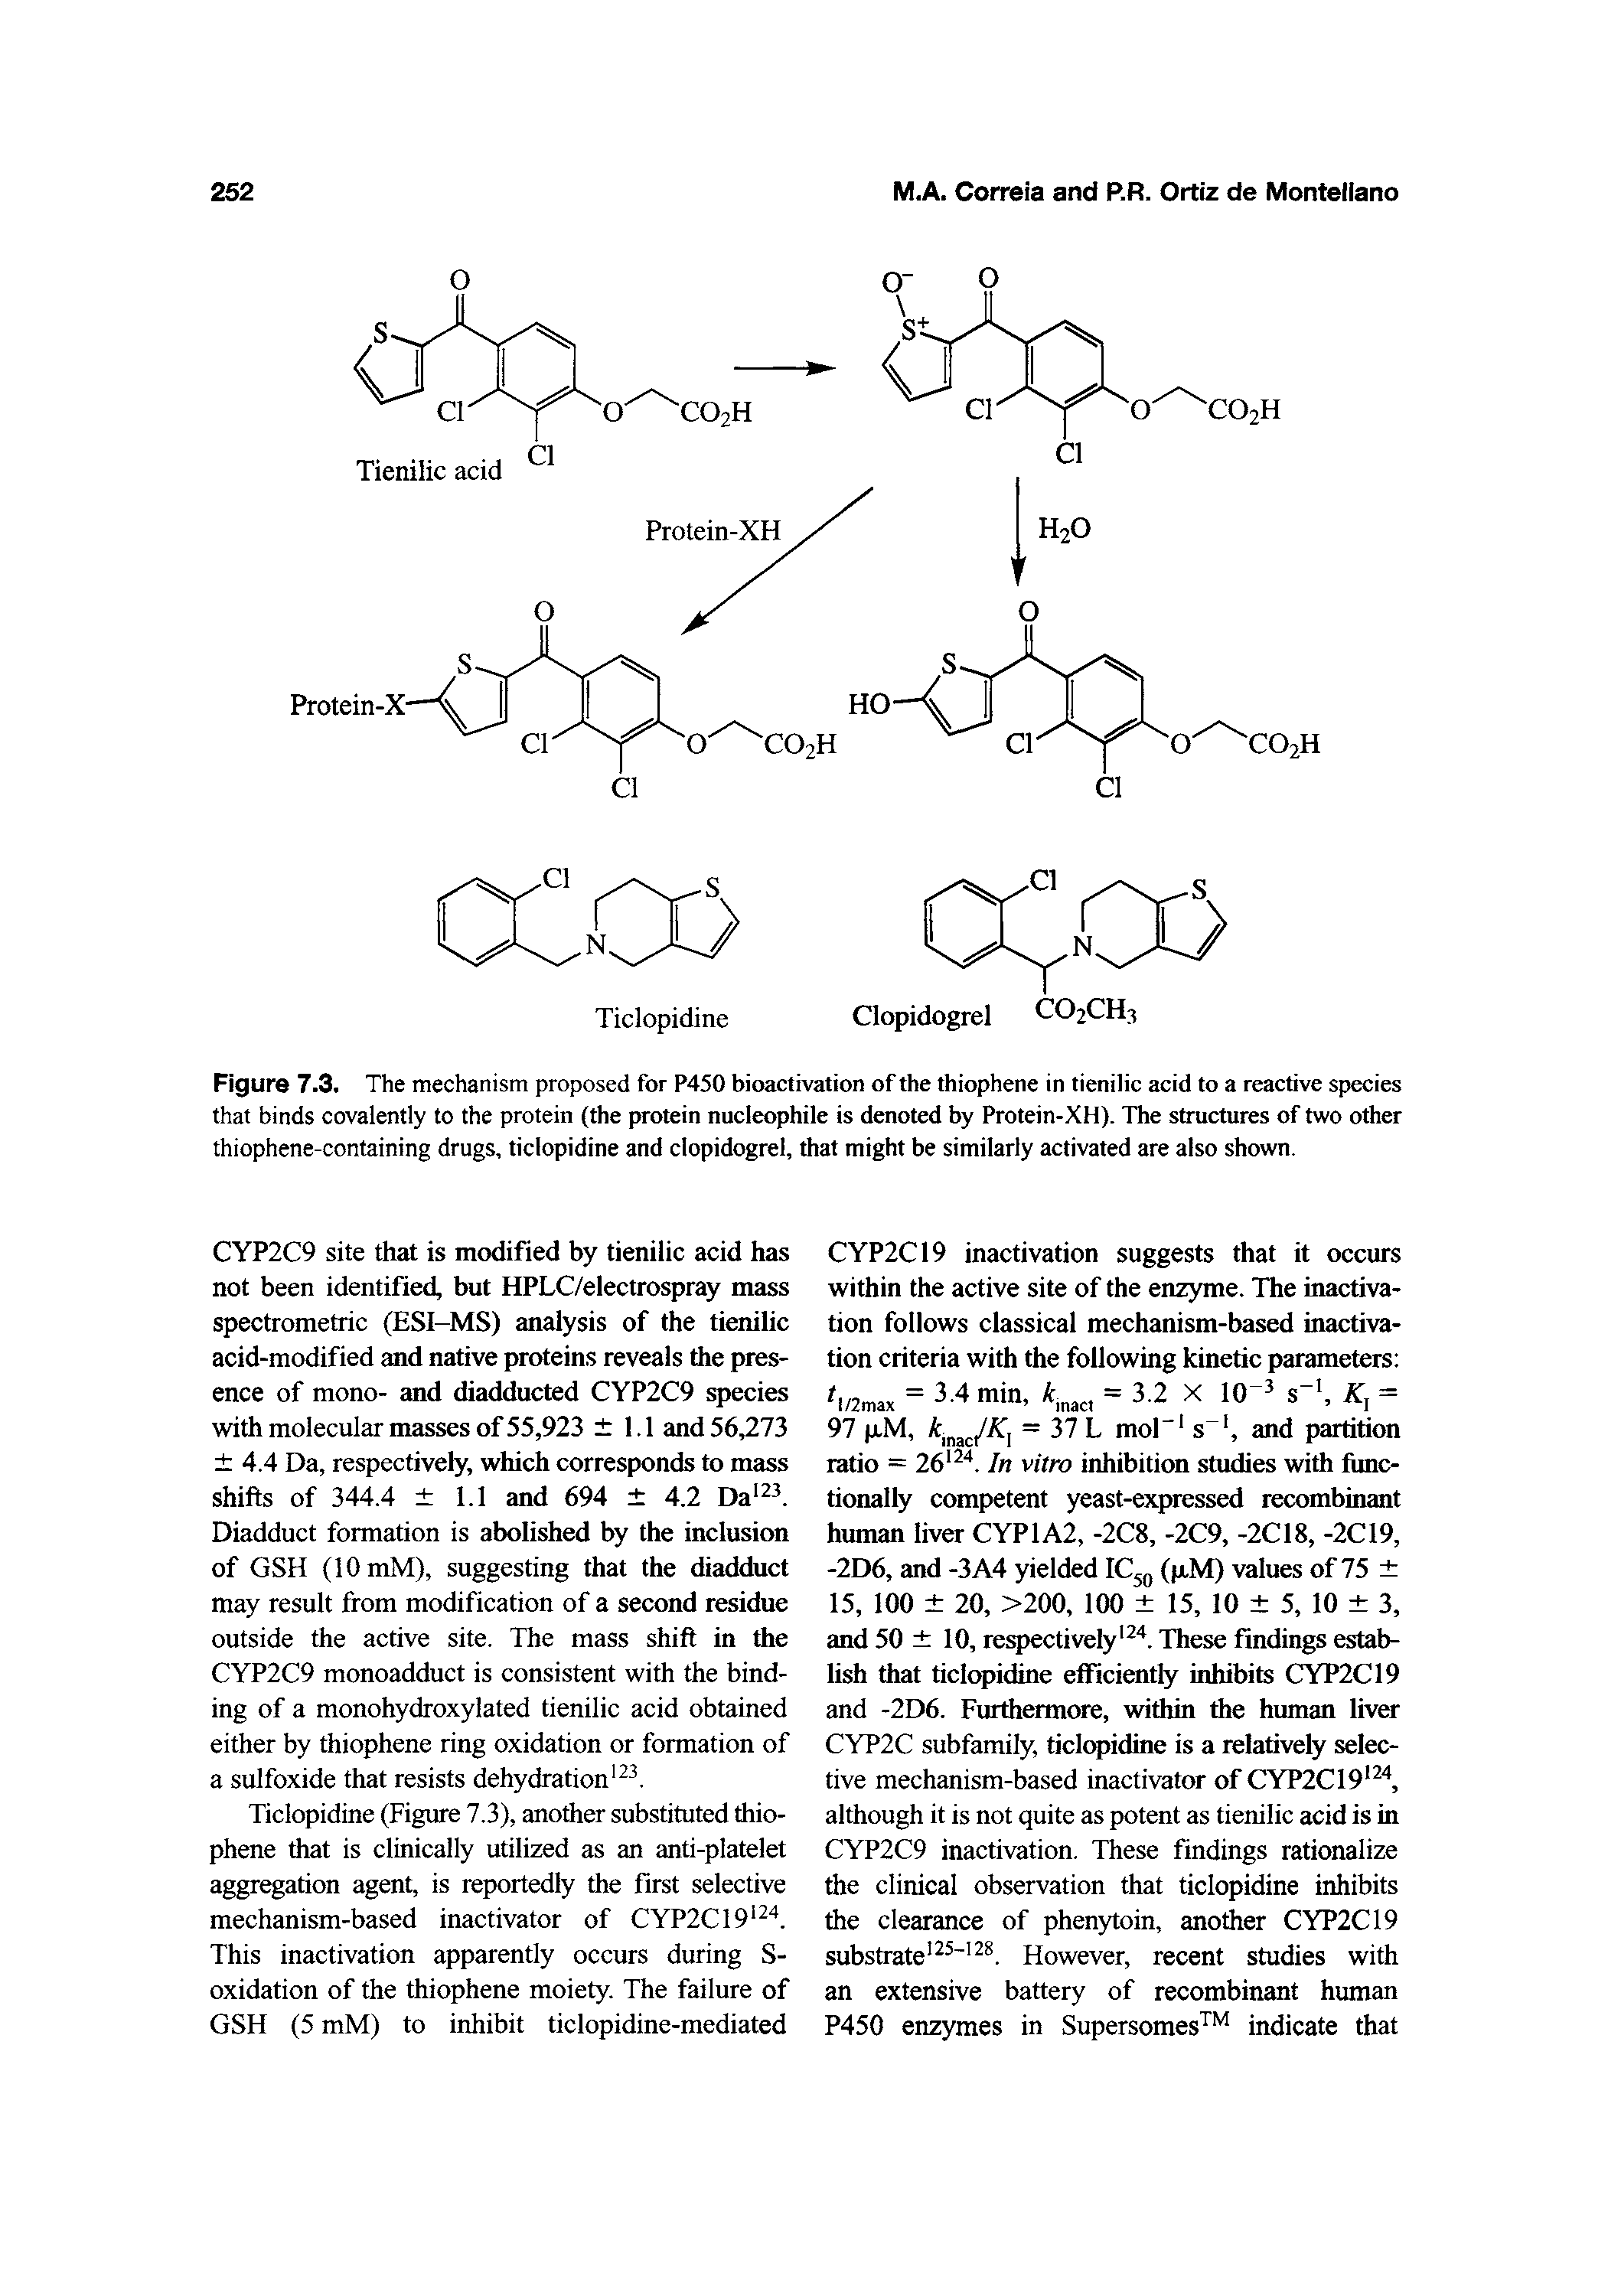 Figure 7.3. The mechanism proposed for P450 bioactivation of the thiophene in tienilic acid to a reactive species that binds covalently to the protein (the protein nucleophile is denoted by Protein-XH). The structures of two other thiophene-containing drugs, ticlopidine and clopidogrel, that might be similarly activated are also shown.